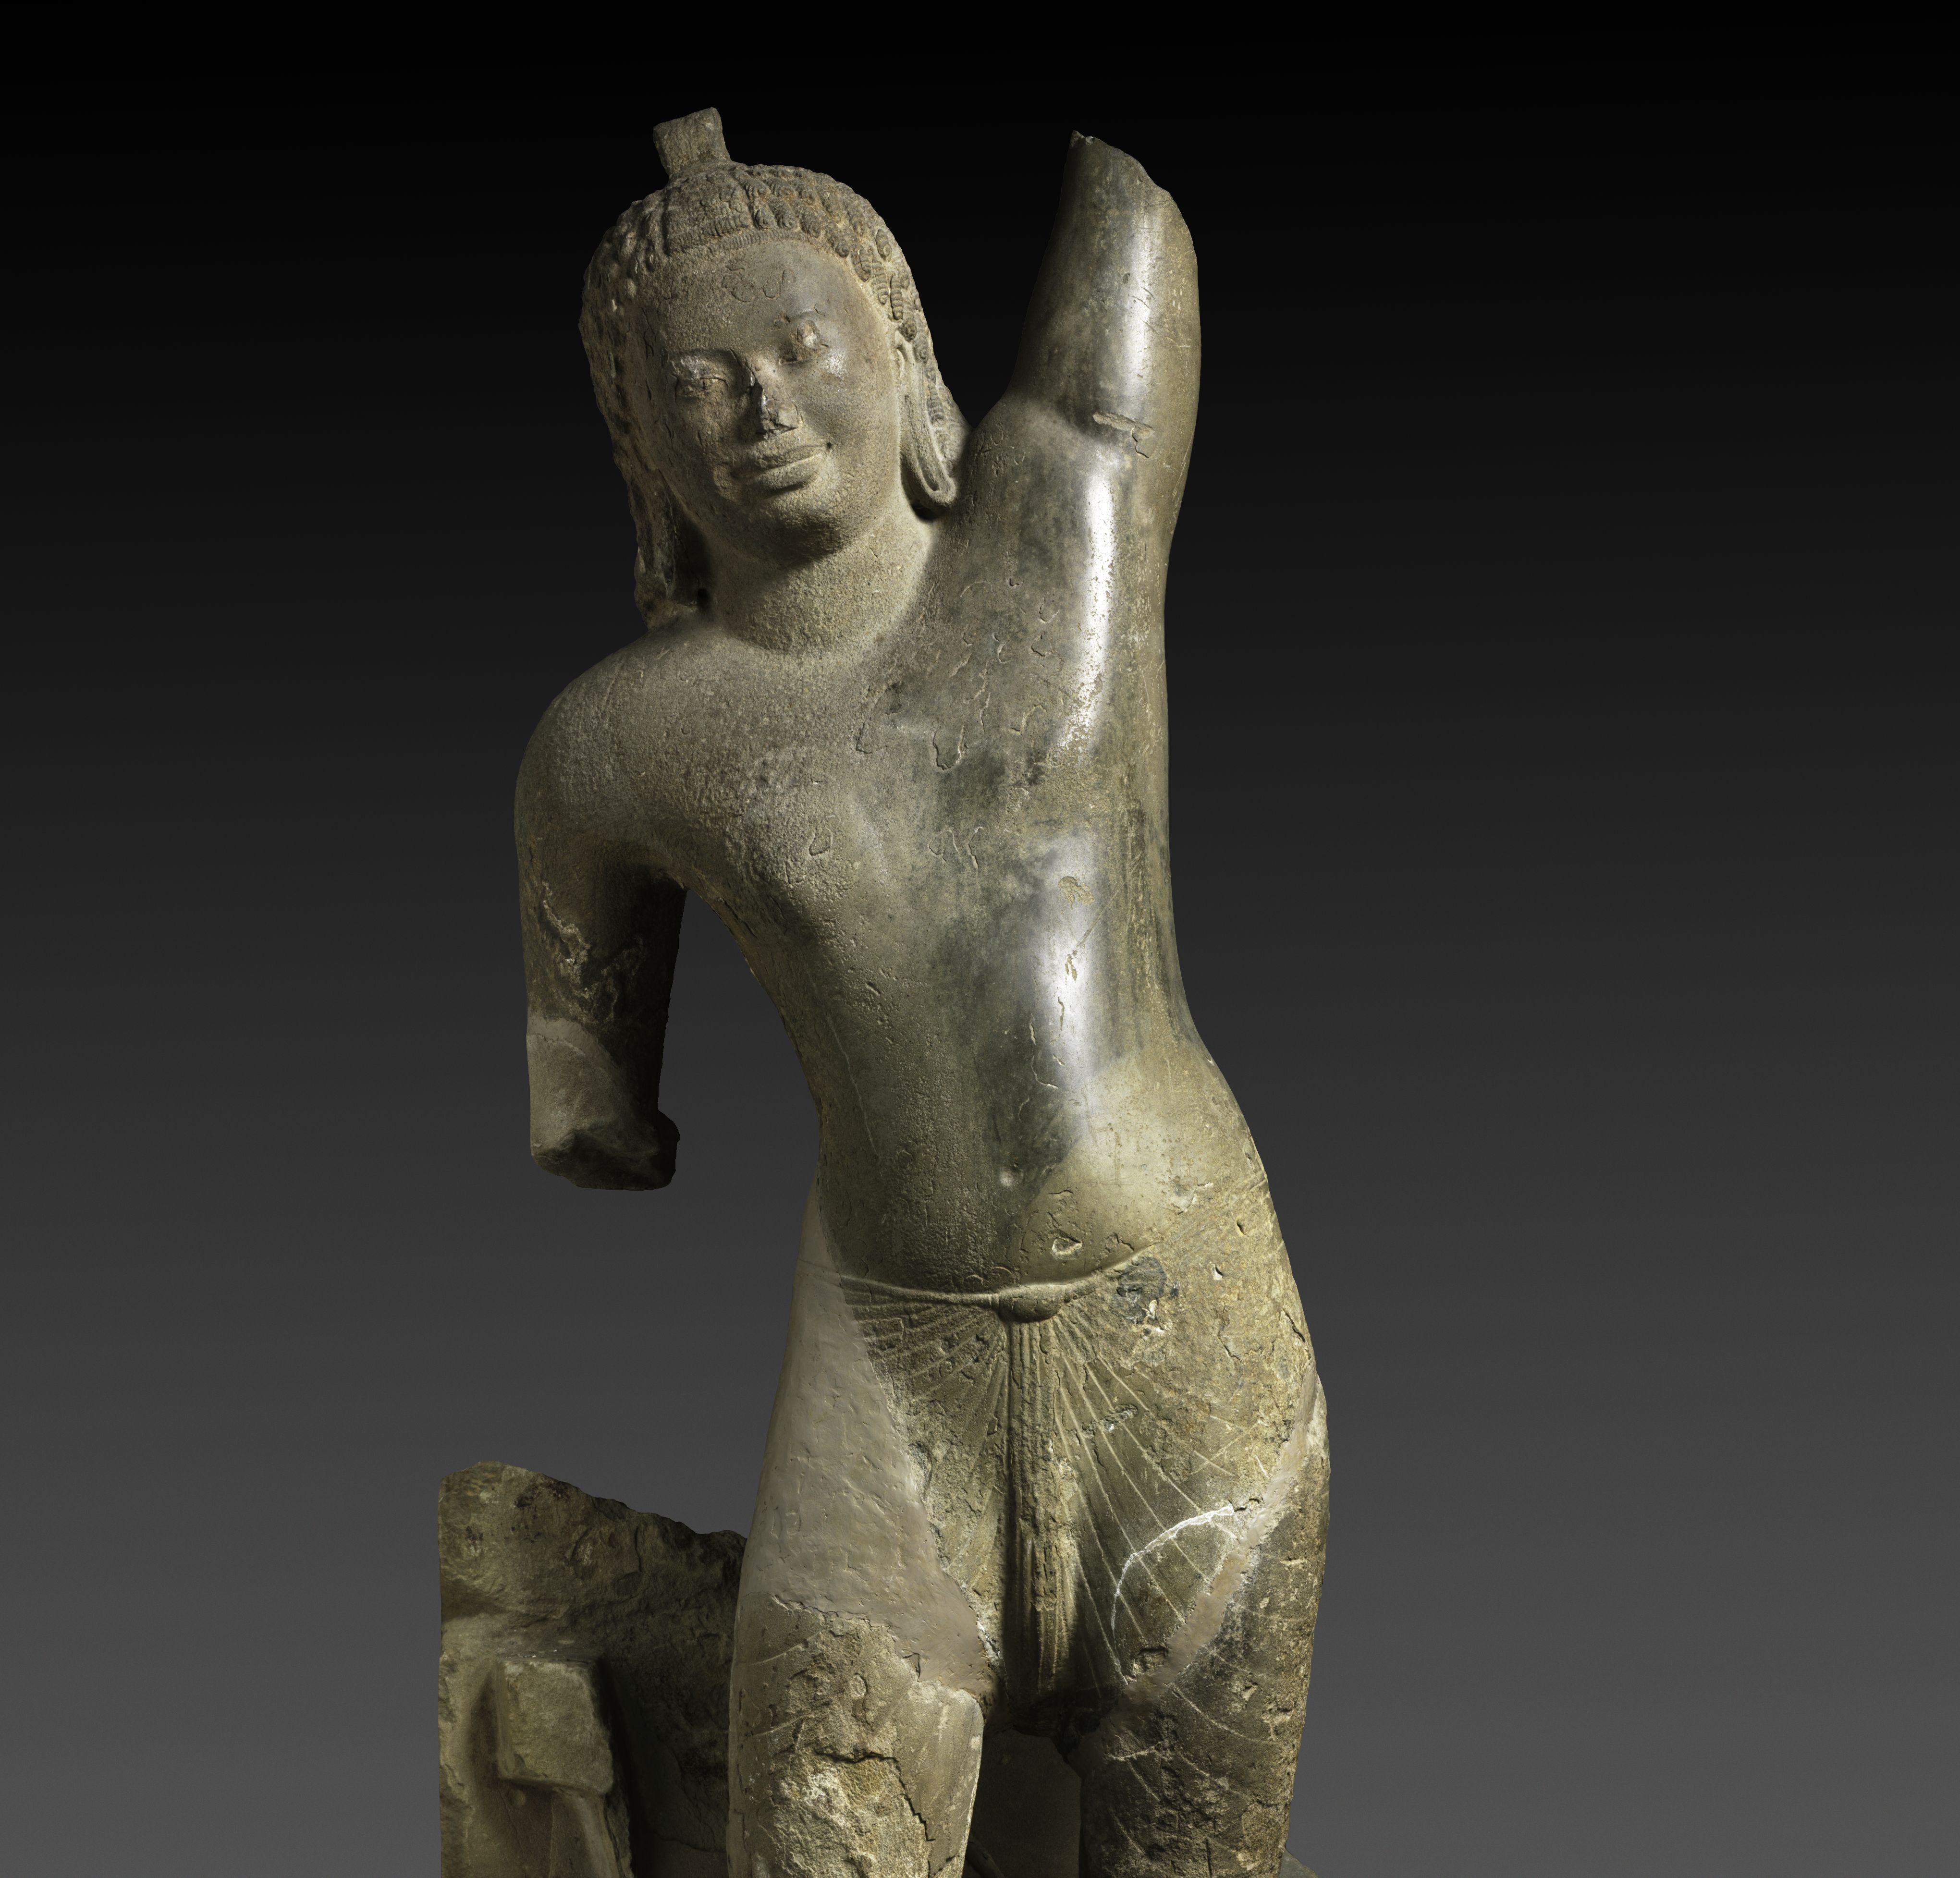 The Cleveland Museum of Art's statue of Krishna Govardhan, shown here in its status quo ante, will be reassembled for an upcoming exhibition.